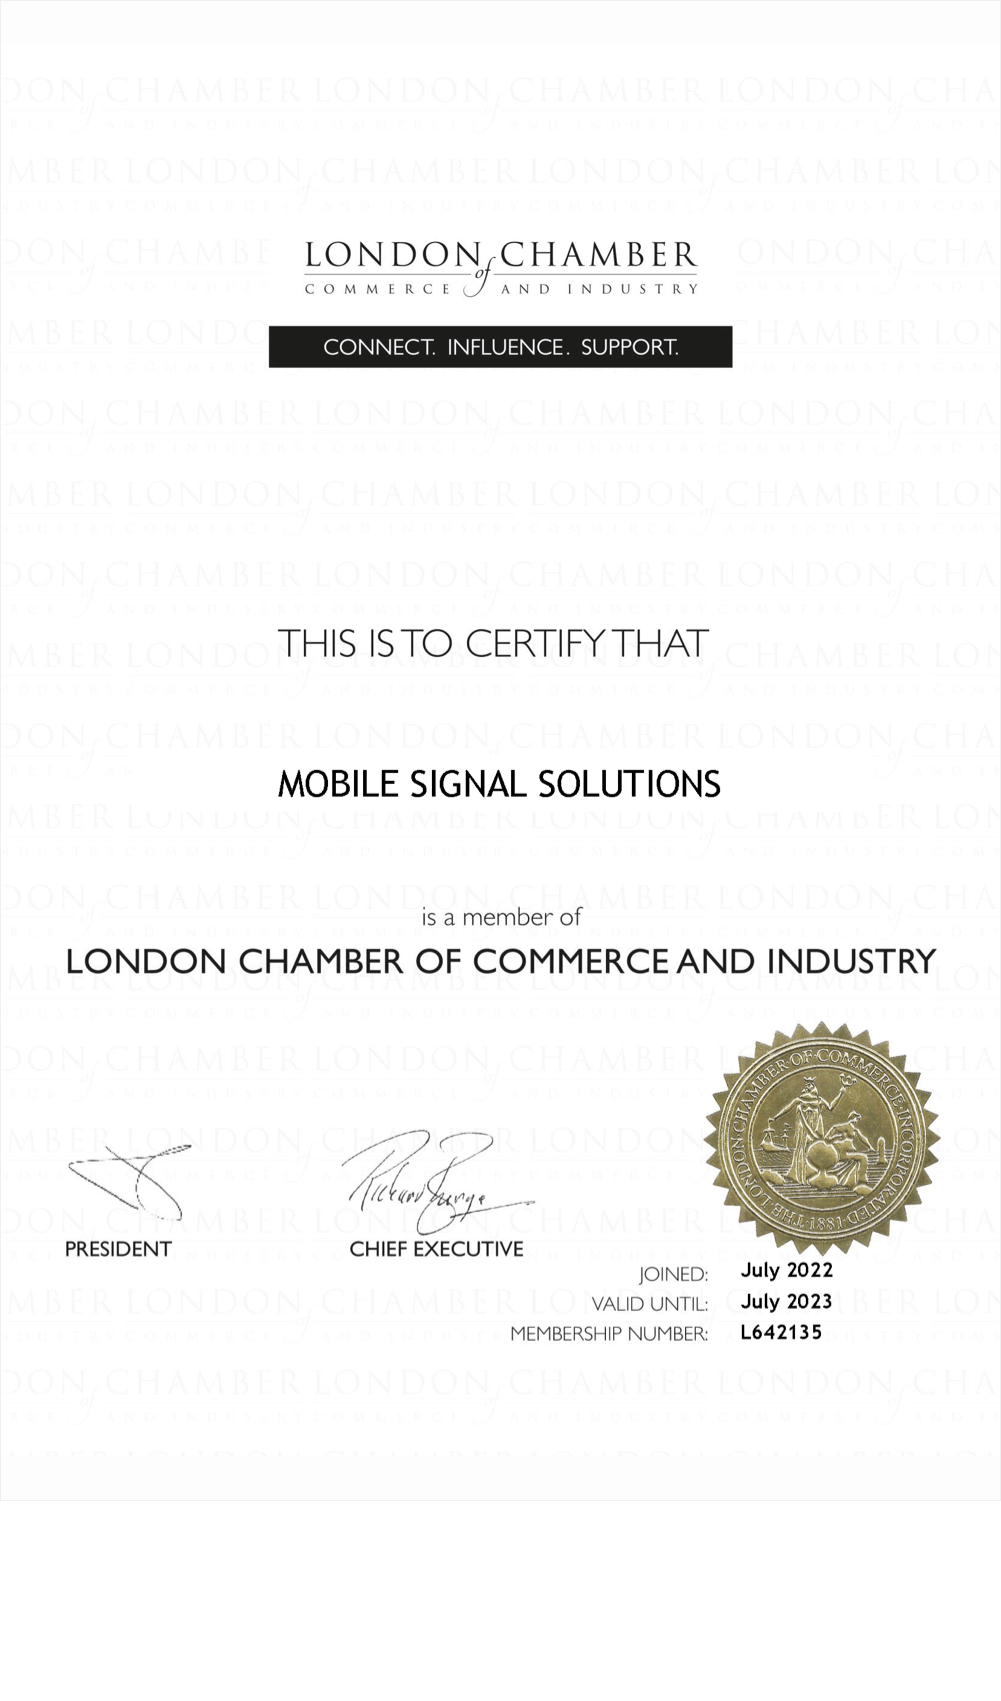 mss certificate-london-chamber-of-commerce